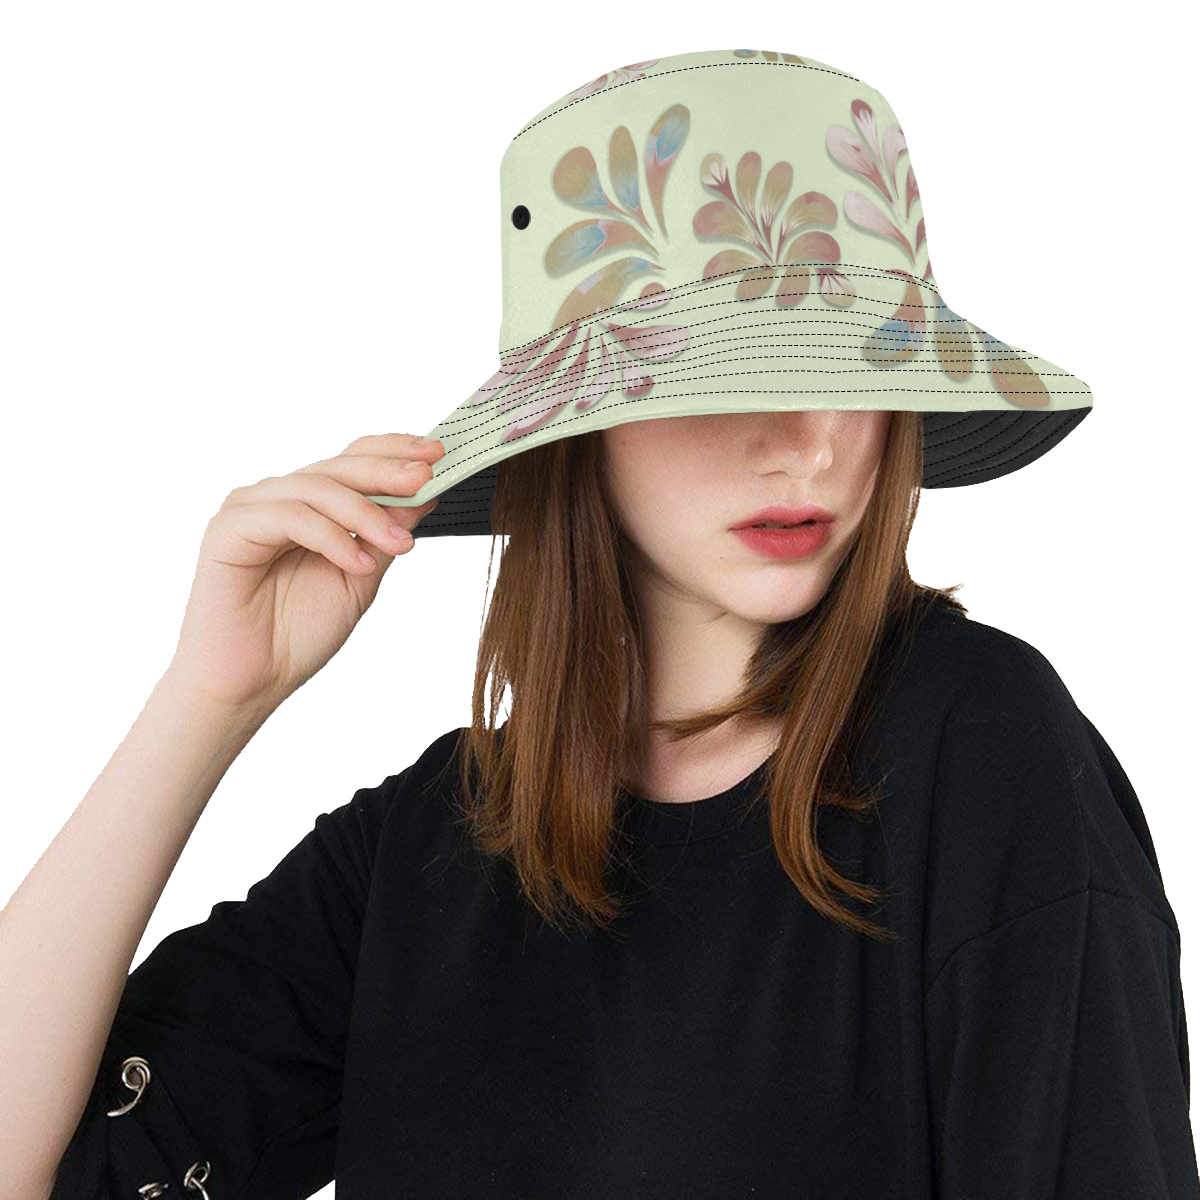 Pastel Floral Dance Pattern All Over Print Bucket Hat